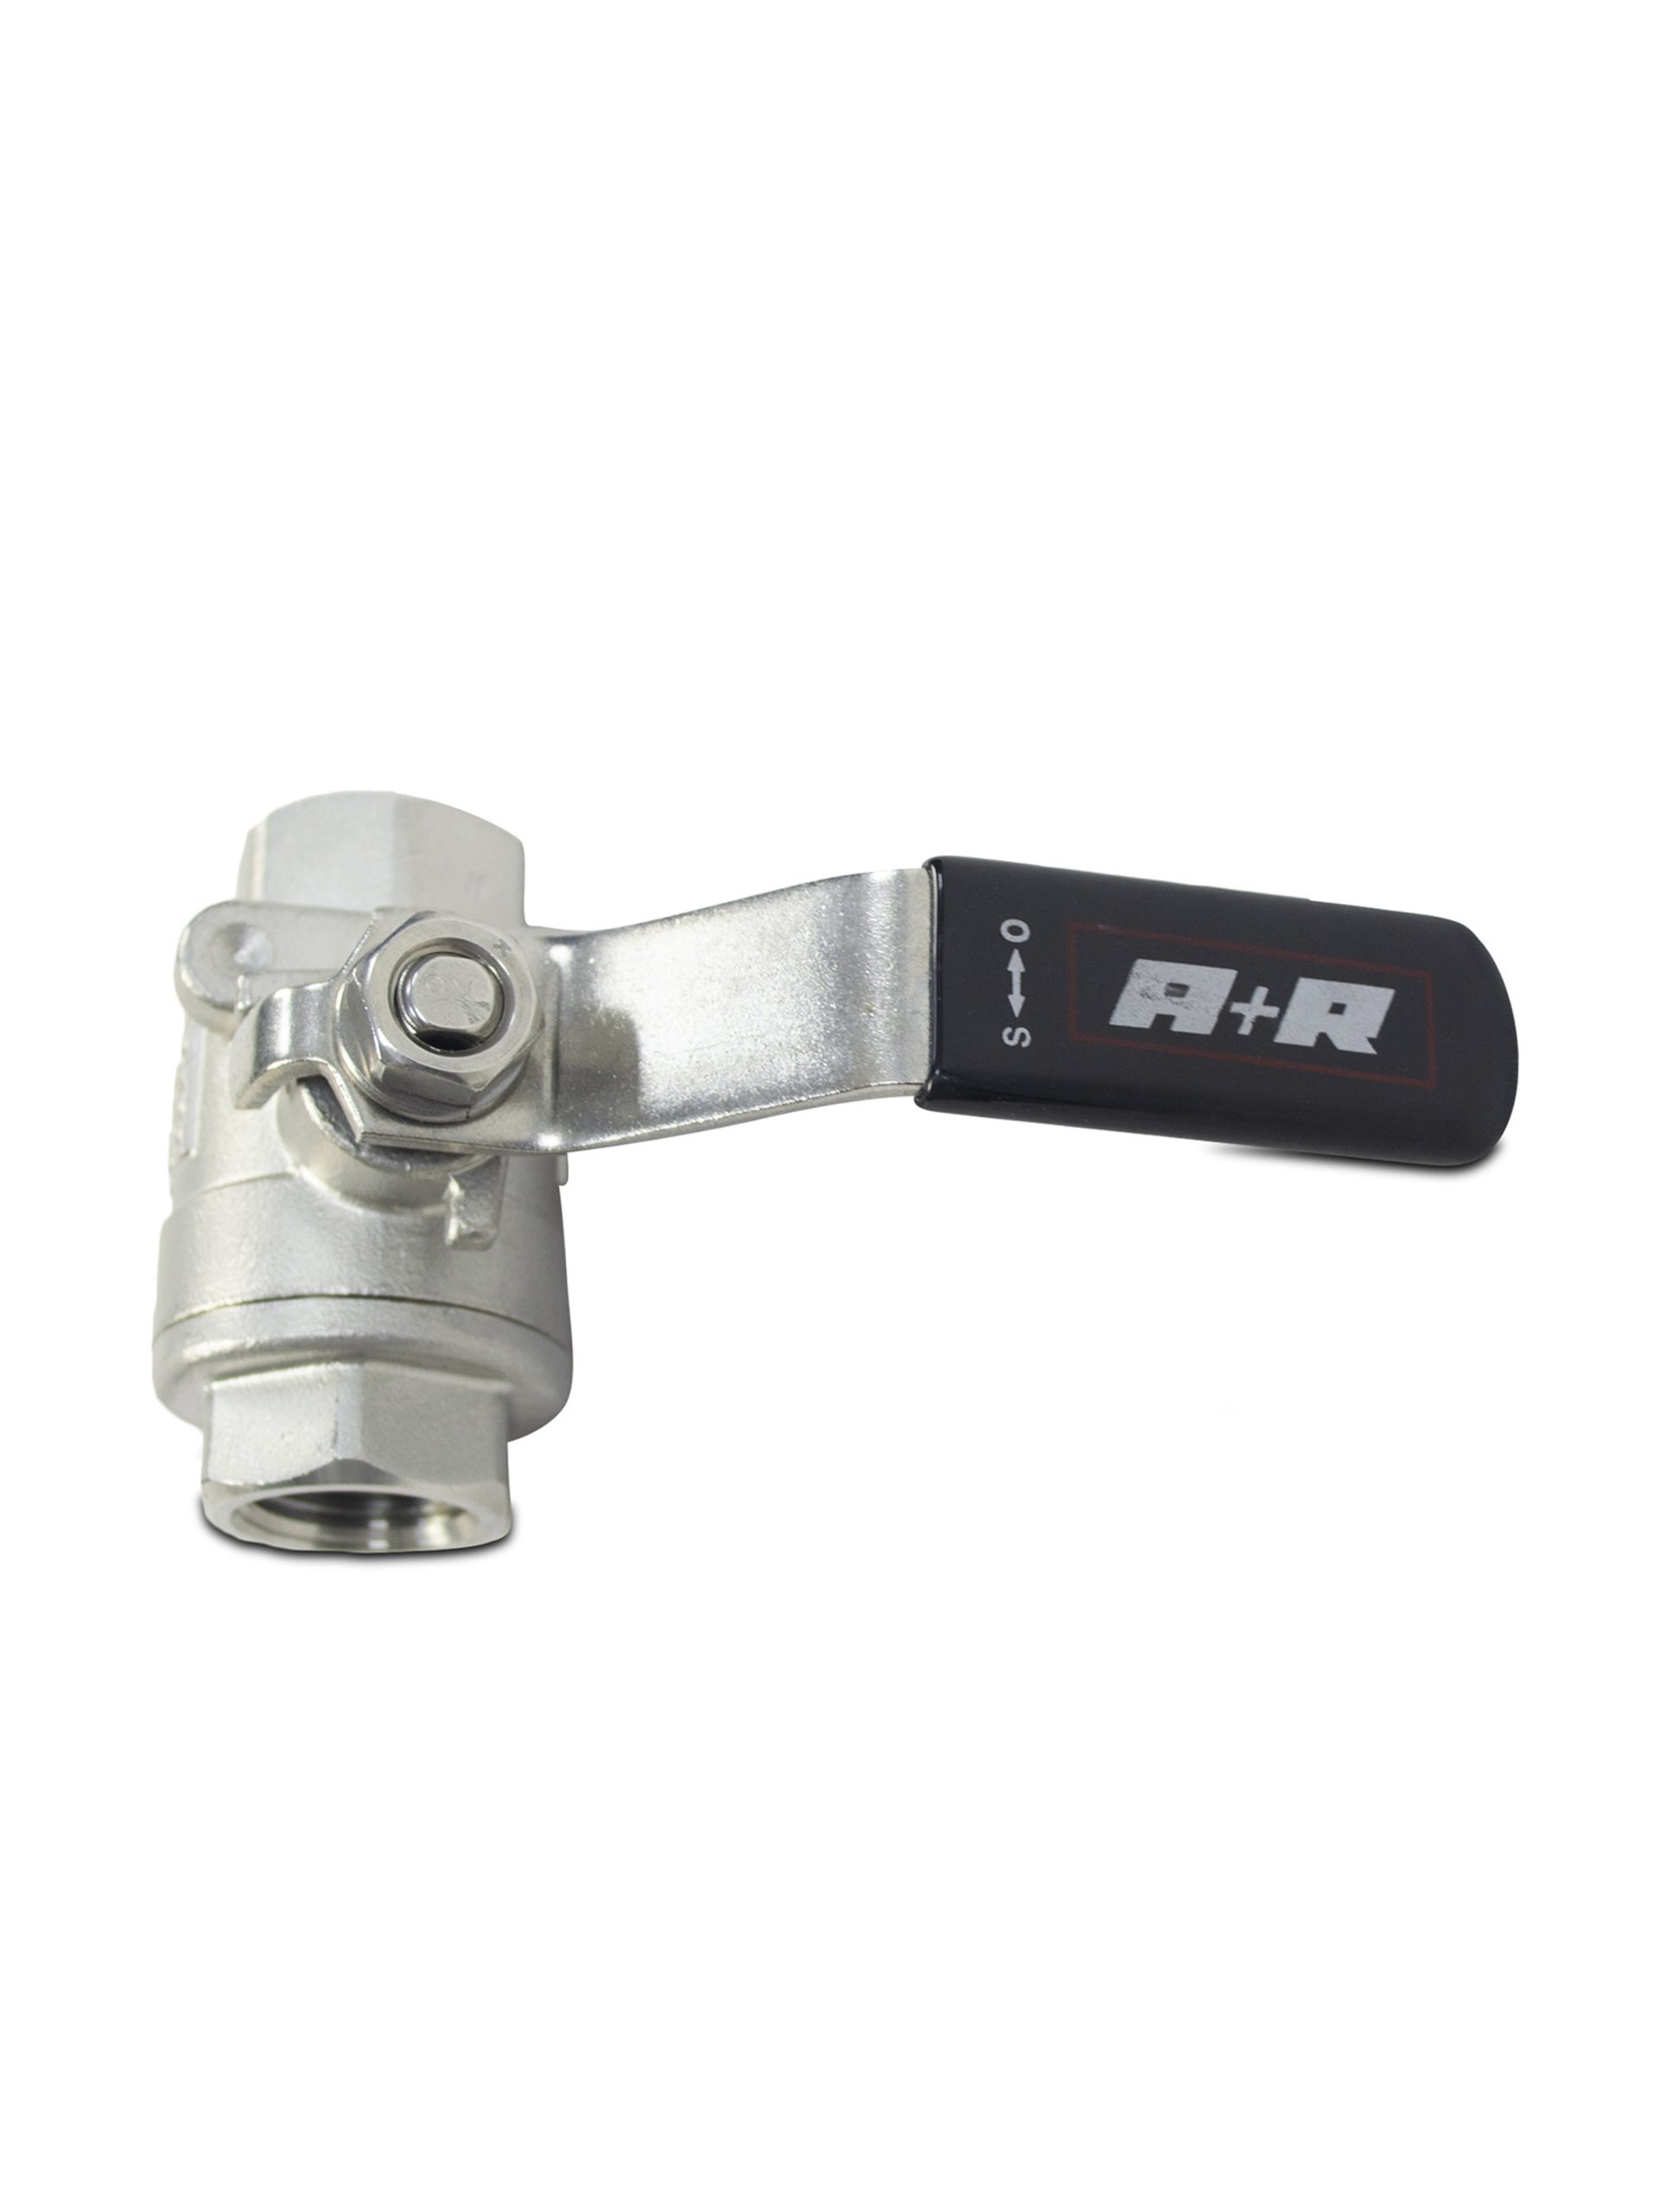 BALL VALVE STAINLESS STEEL 1/2 Inches